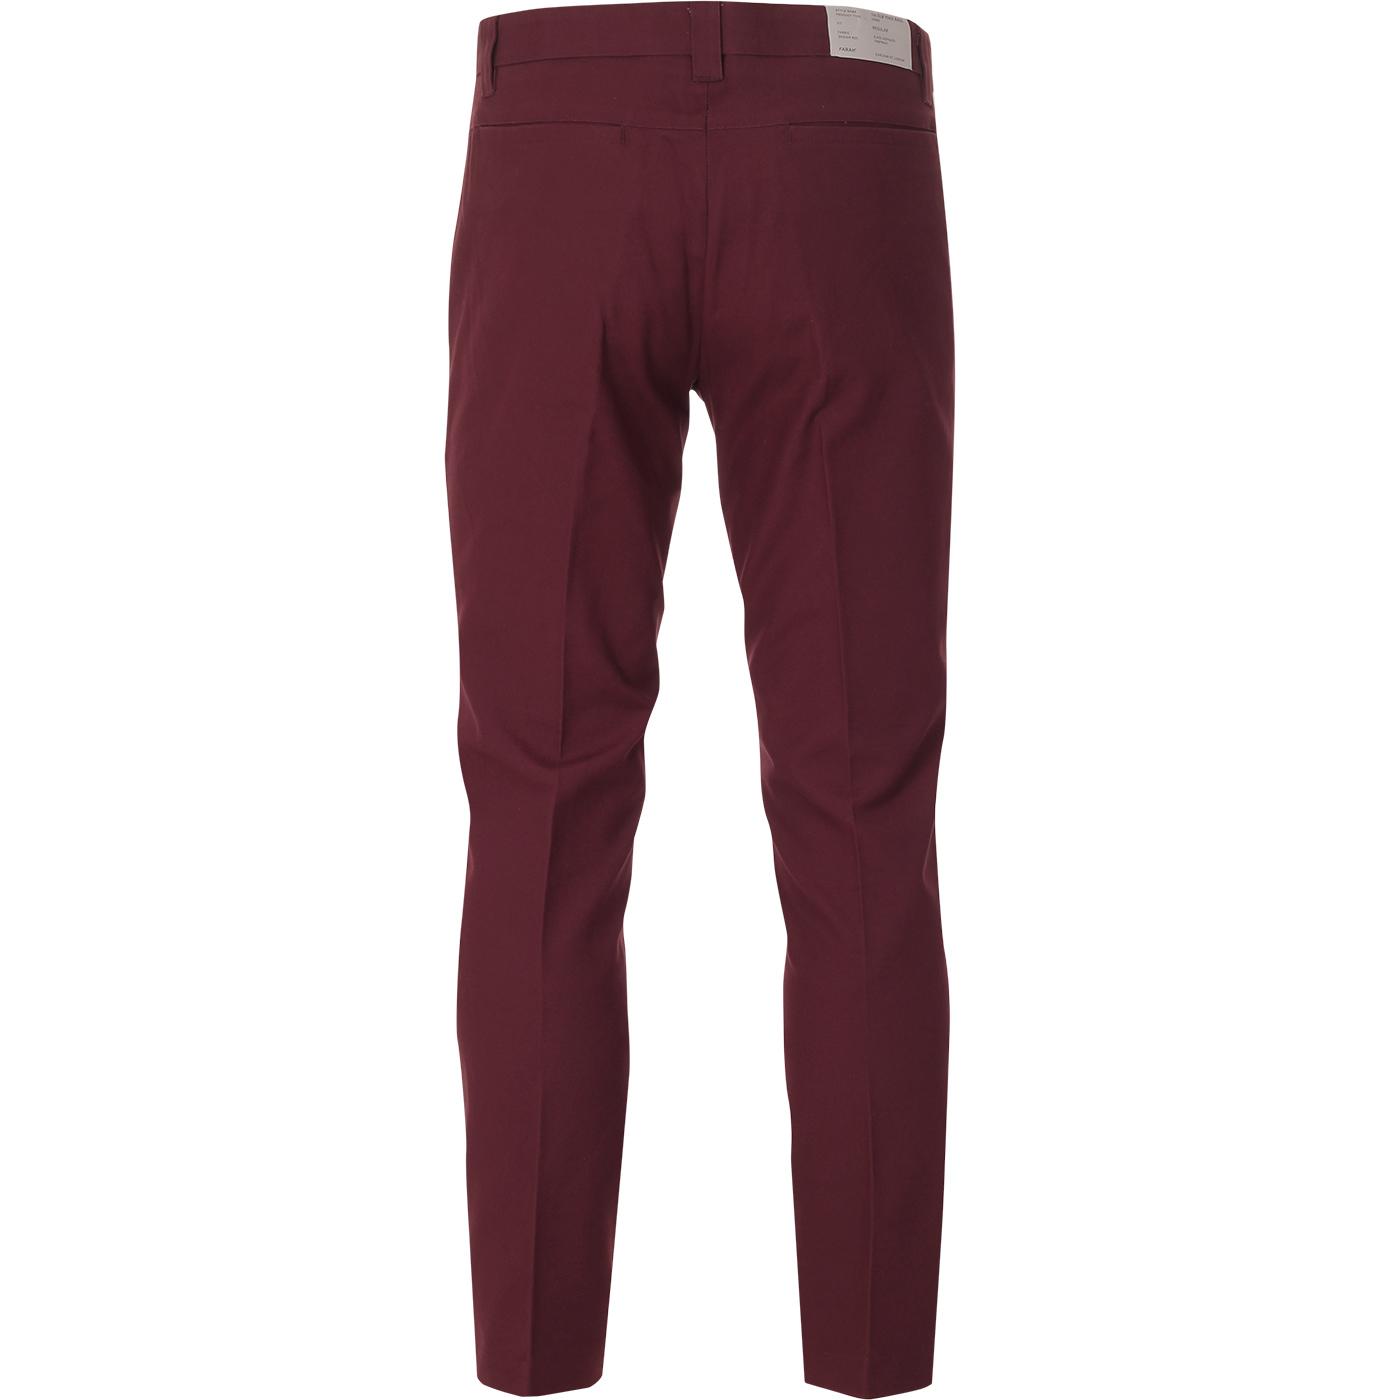 FARAH Elm Archive 60s Mod Hopsack Trousers in Farah Red